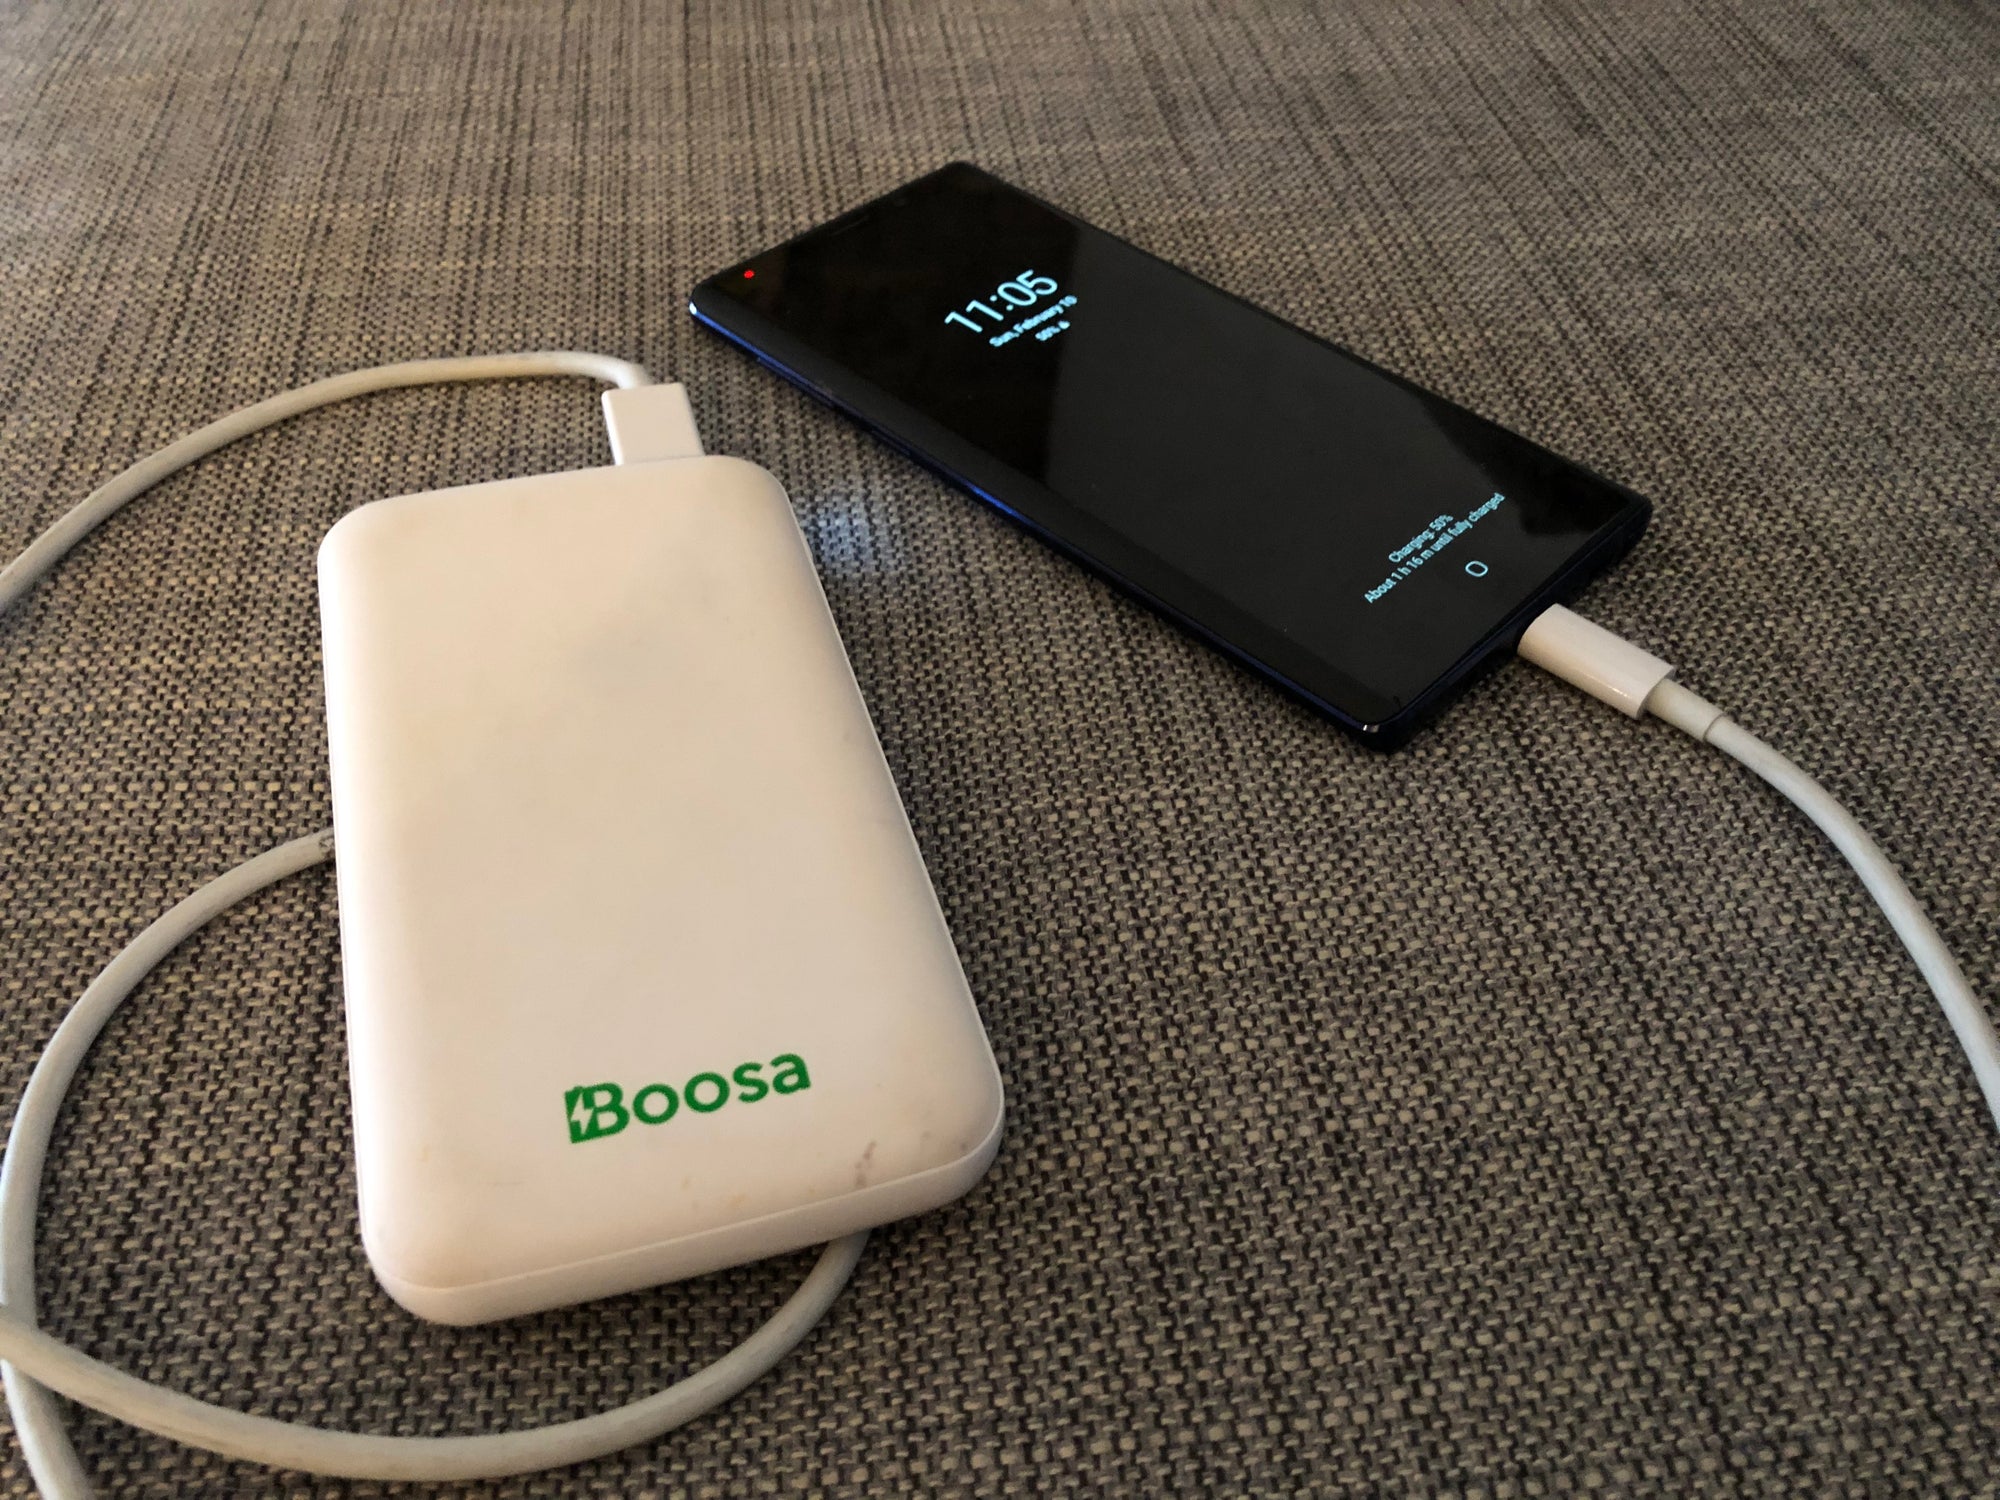 How Do I Use Boosa to Charge My Smartphone?